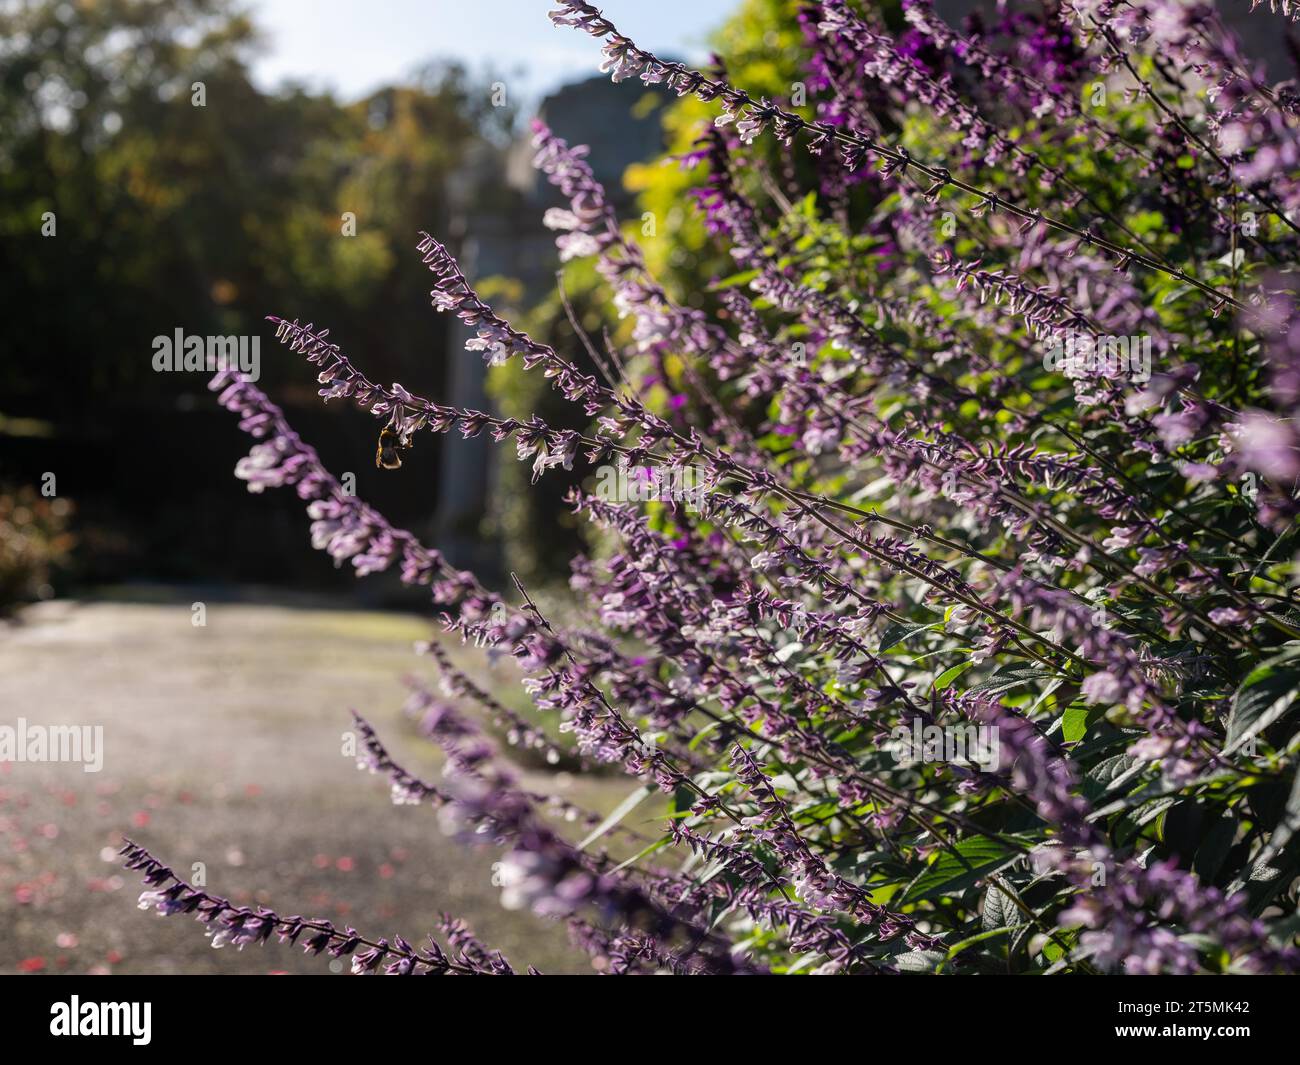 A bumble bee interacting with flowers in a park. Stock Photo